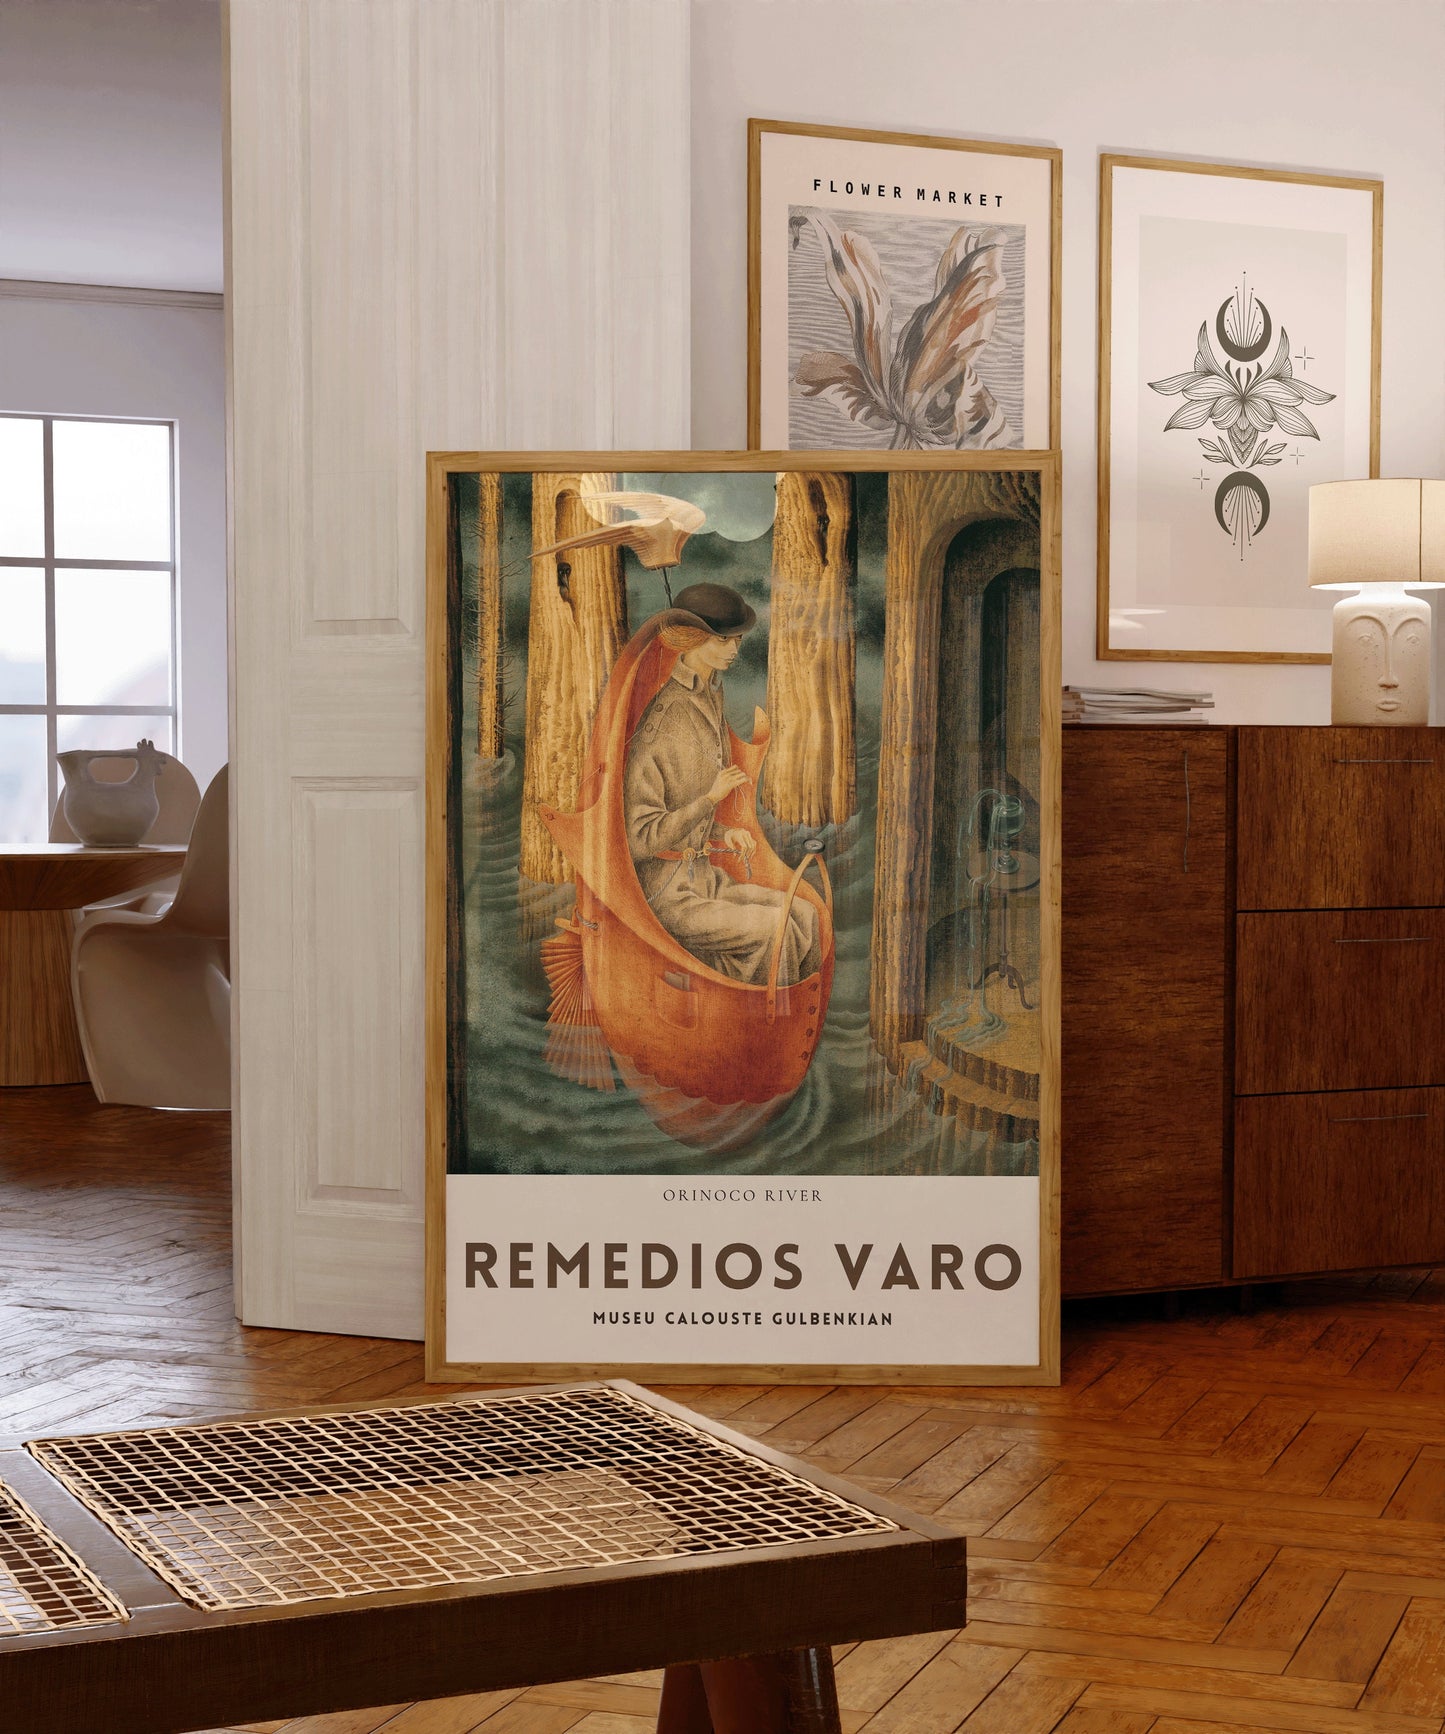 Remedios Varo Orinoco River Fine Surreal Art Famous Mexican Iconic Painting Vintage Ready to hang Framed Home Office Decor Print Gift Idea